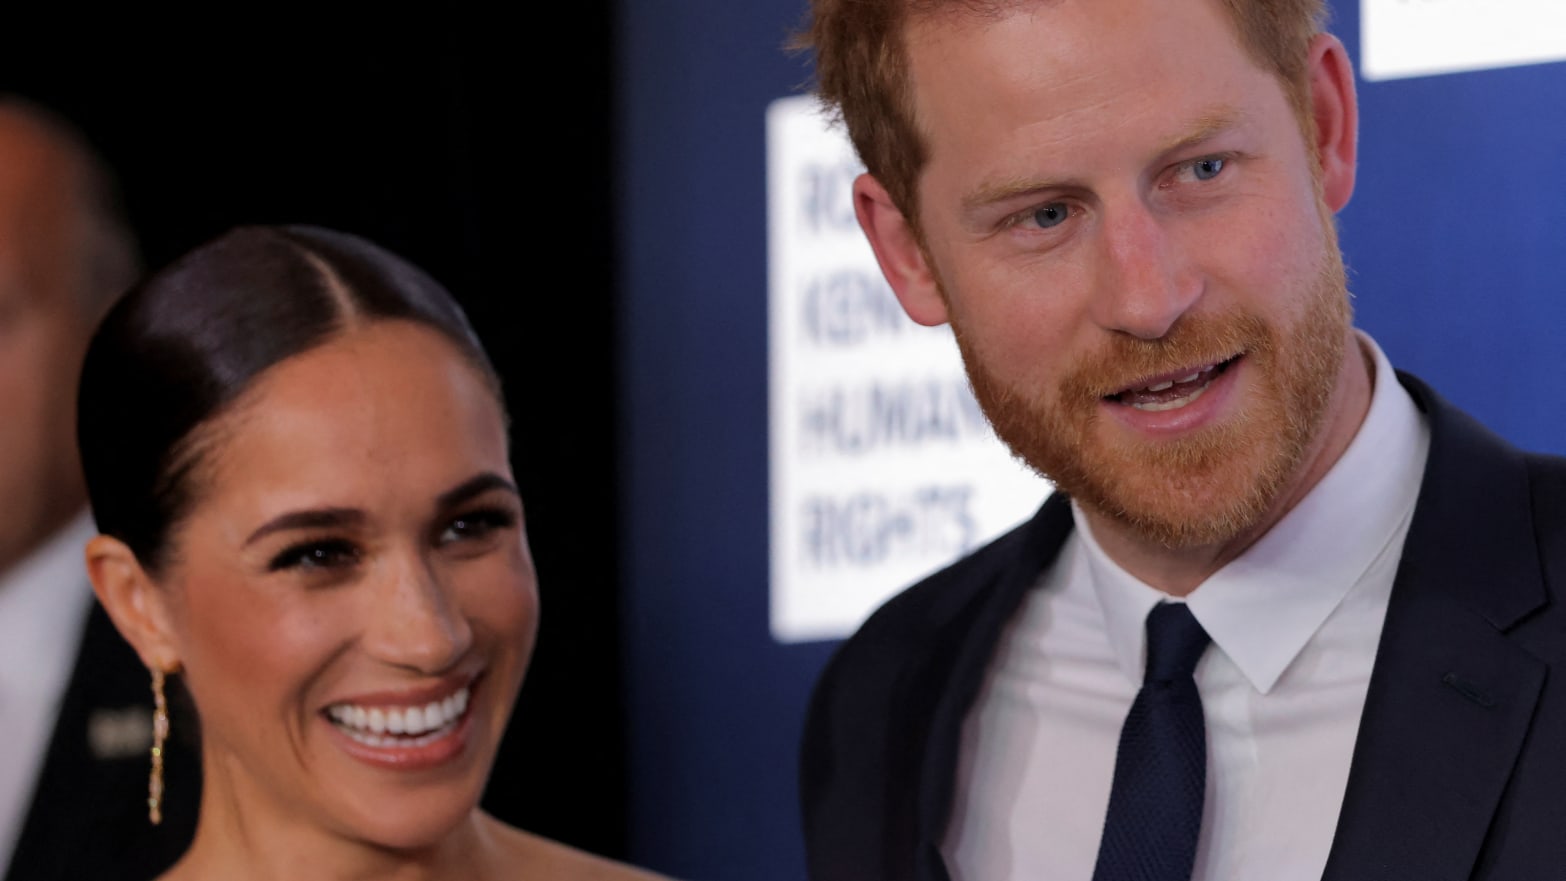 Britain's Prince Harry, Duke of Sussex and Meghan, Duchess of Sussex attend the 2022 Robert F. Kennedy Human Rights Ripple of Hope Award Gala in New York City, U.S., December 6, 2022.